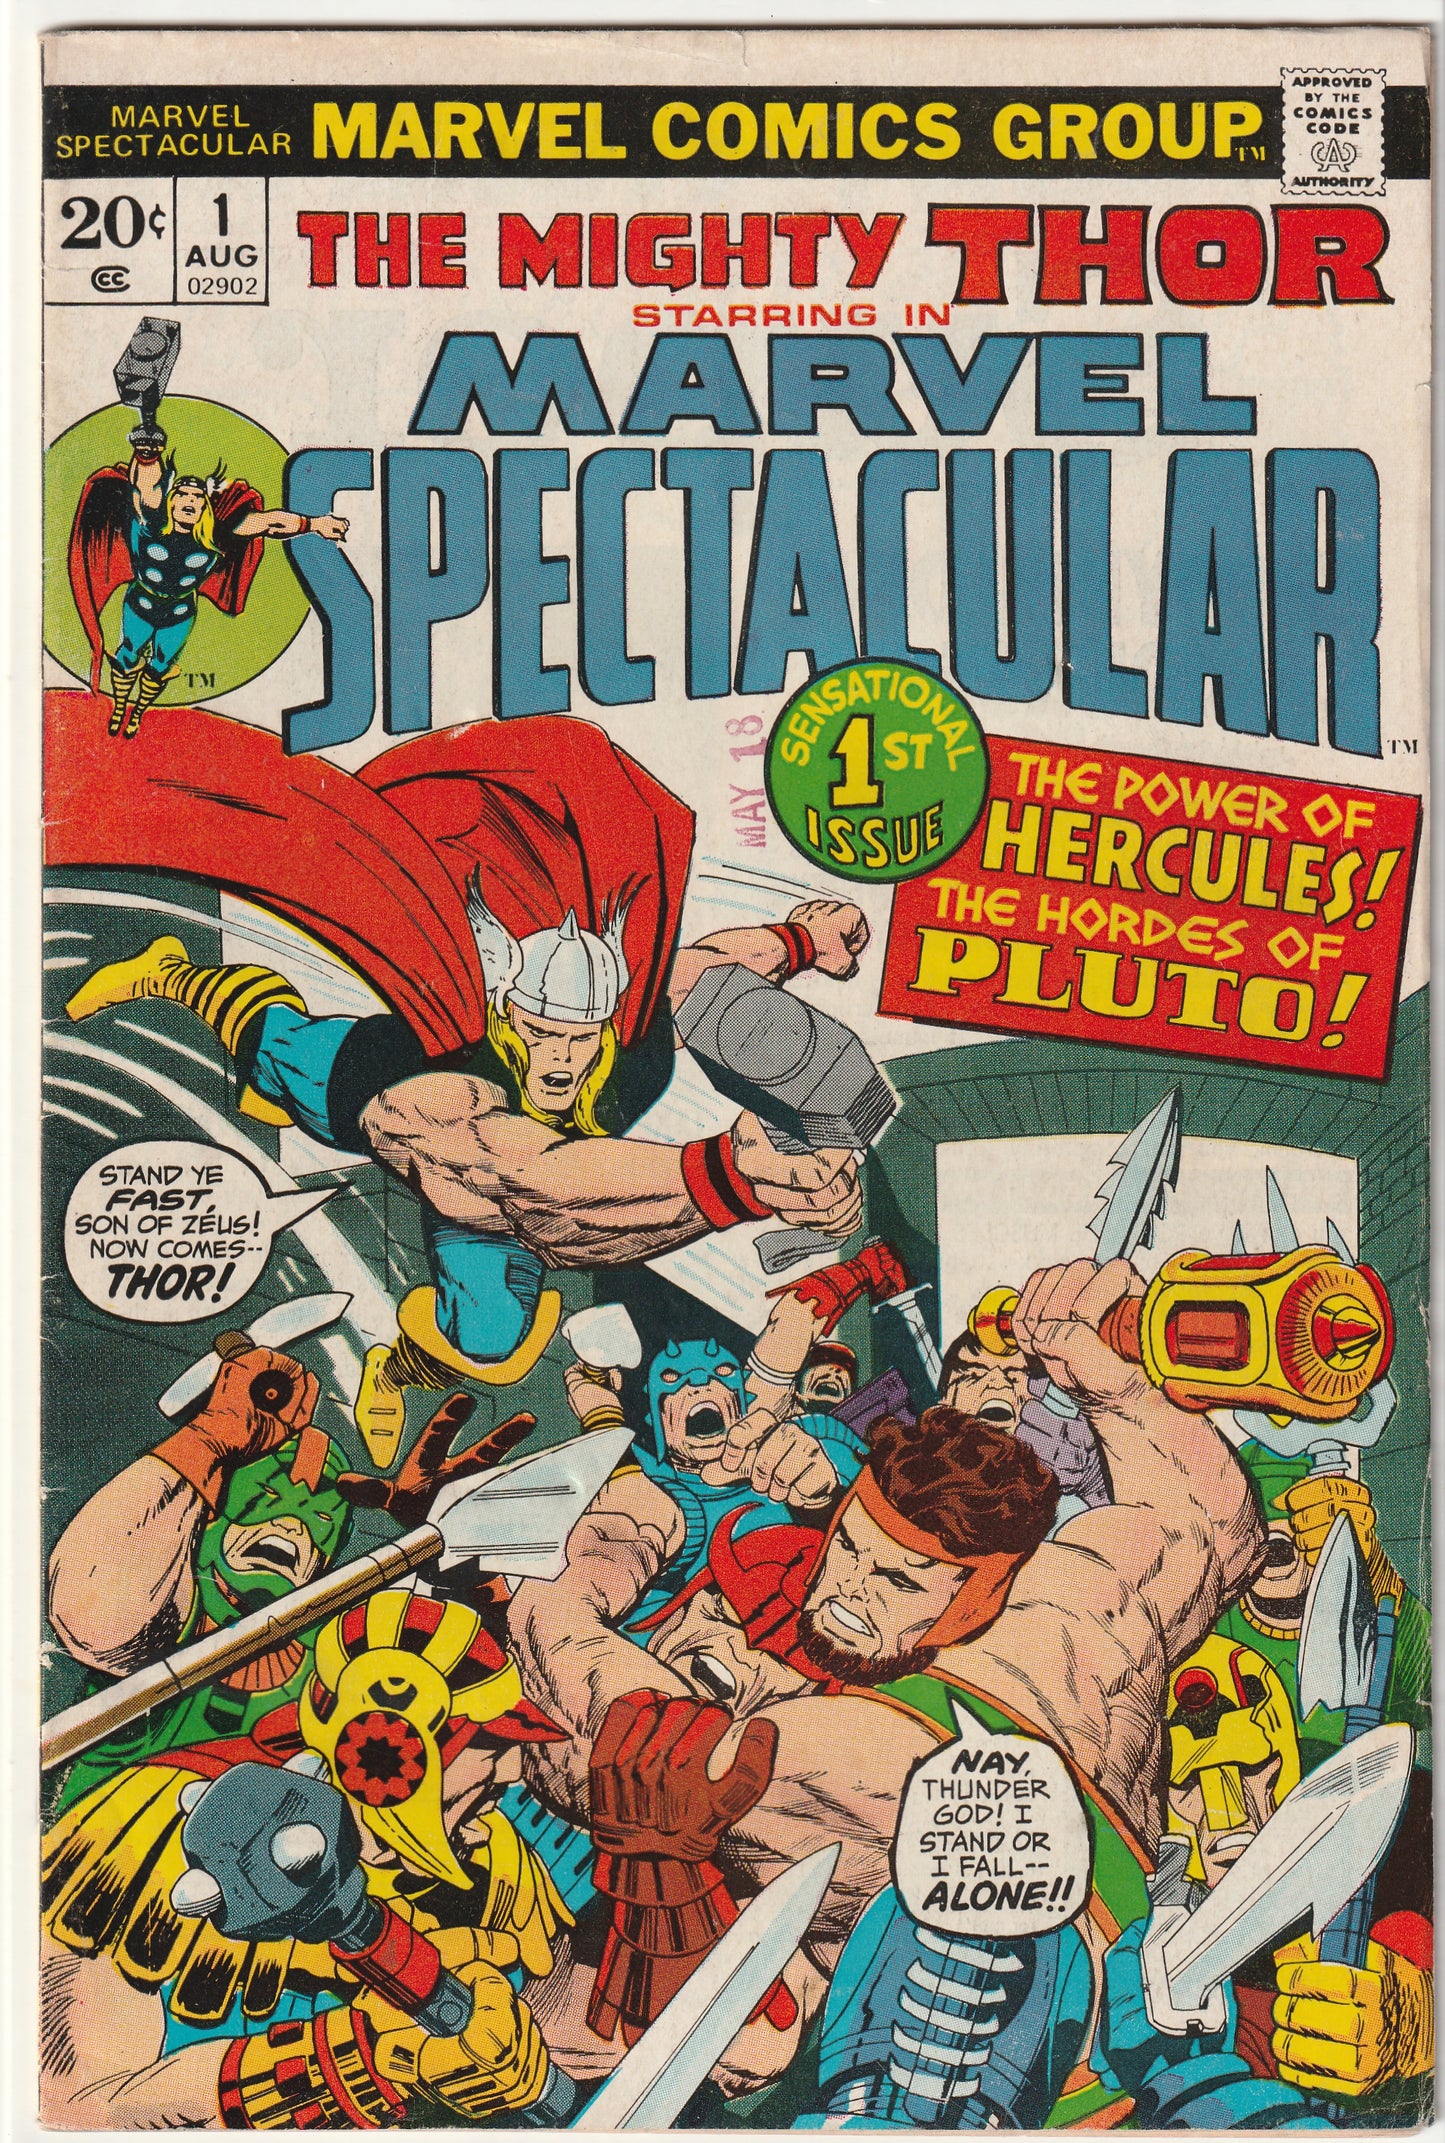 Marvel Spectacular #1 Starring The Mighty Thor (1973) - Stan Lee & Jack Kirby